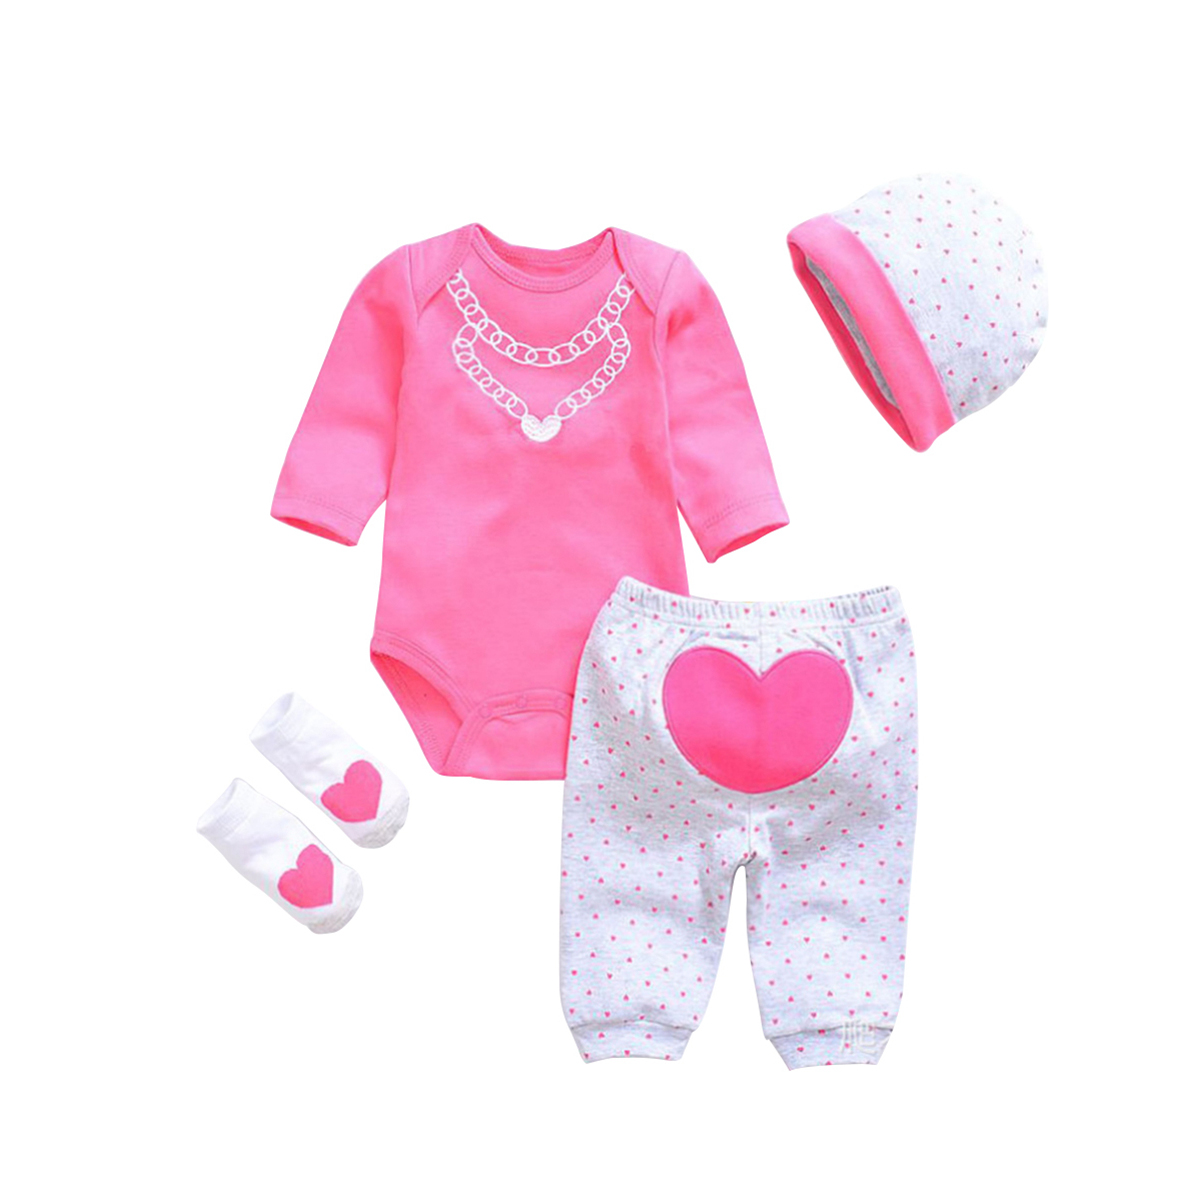 Baby Doll Accessories Clothes for Girl Baby Doll - World Reborn Doll